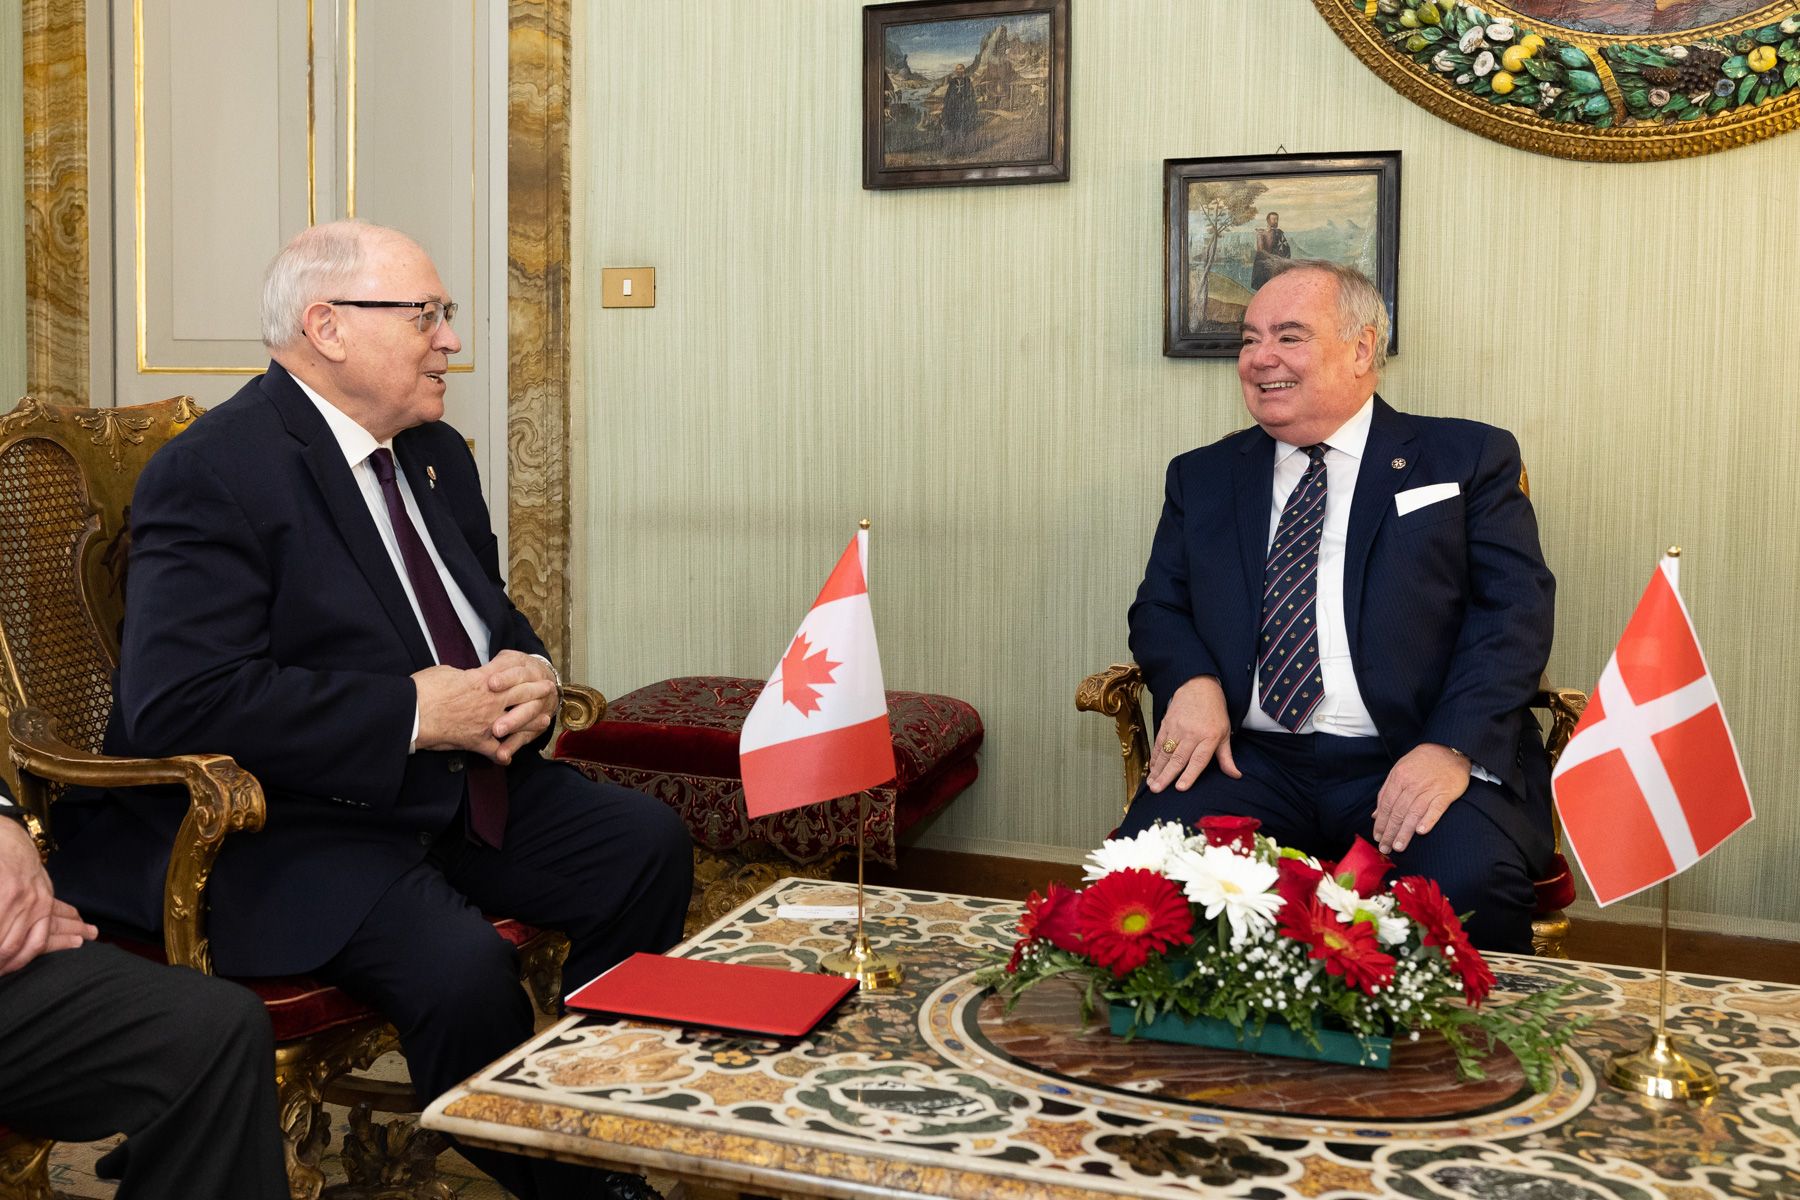 Official visit of the Speaker of the Senate of Canada